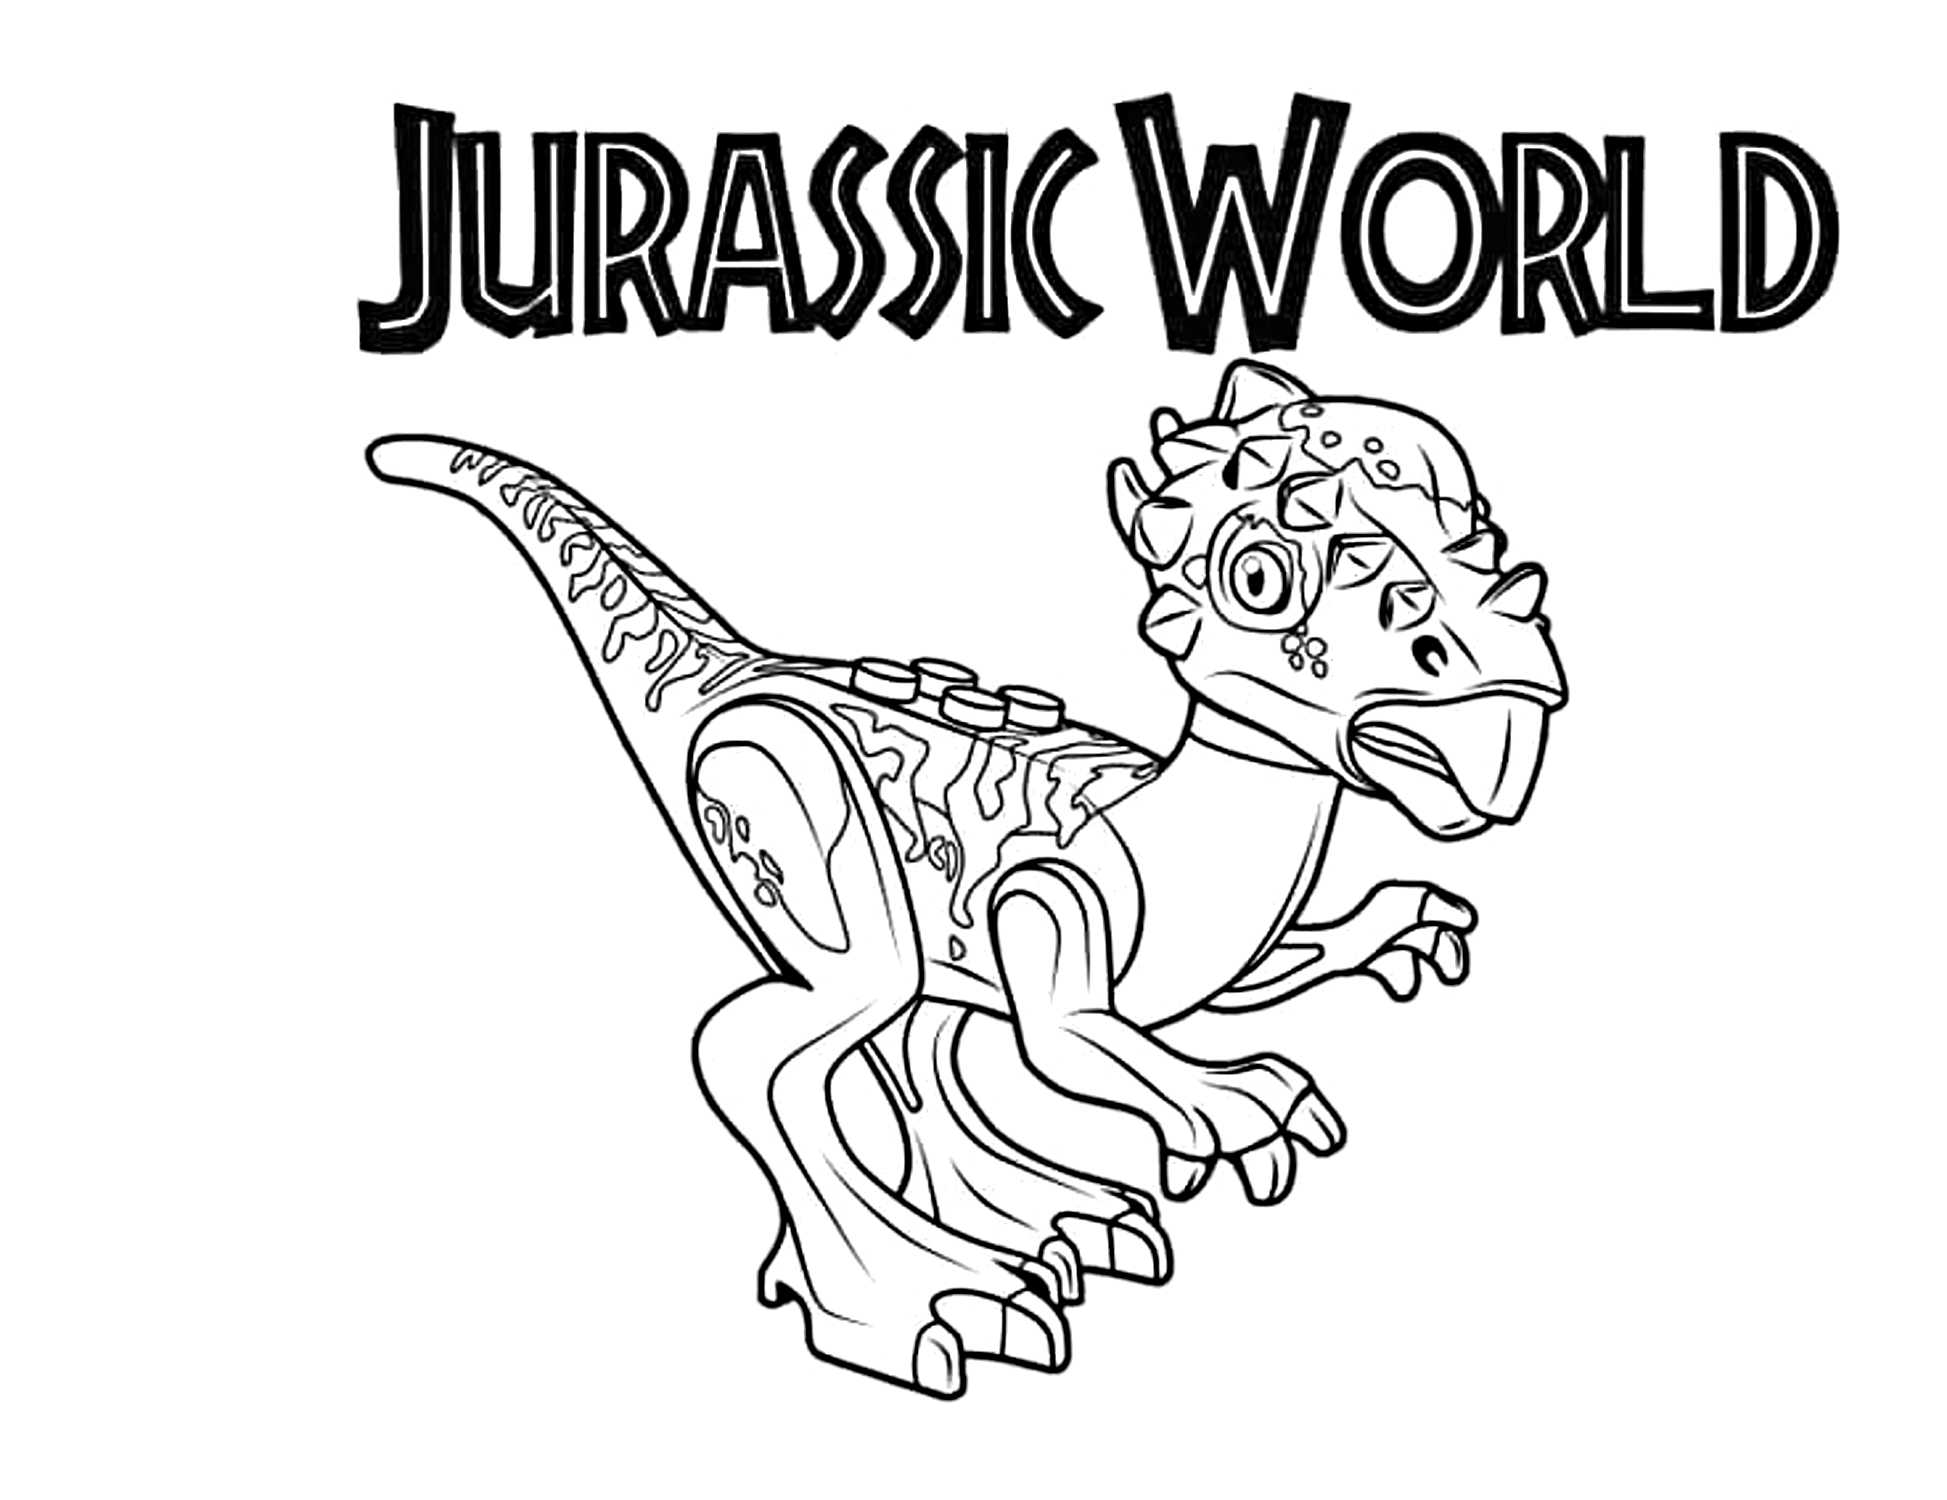 Jurassic World 36 coloring page